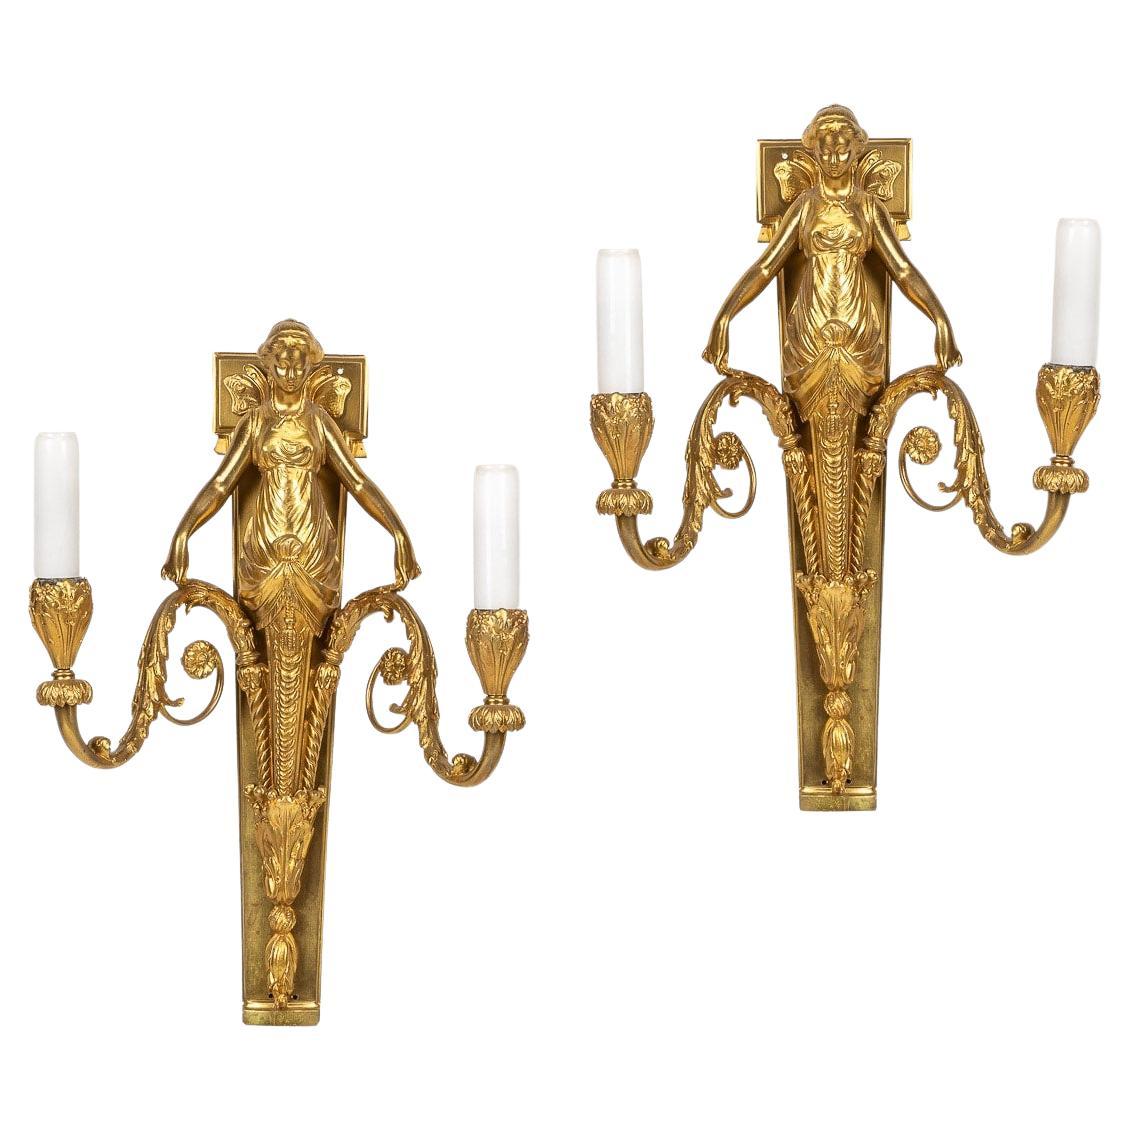 19th Century French Neoclassical Style Pair of Ormolu Gilt D'appliques, C.1870